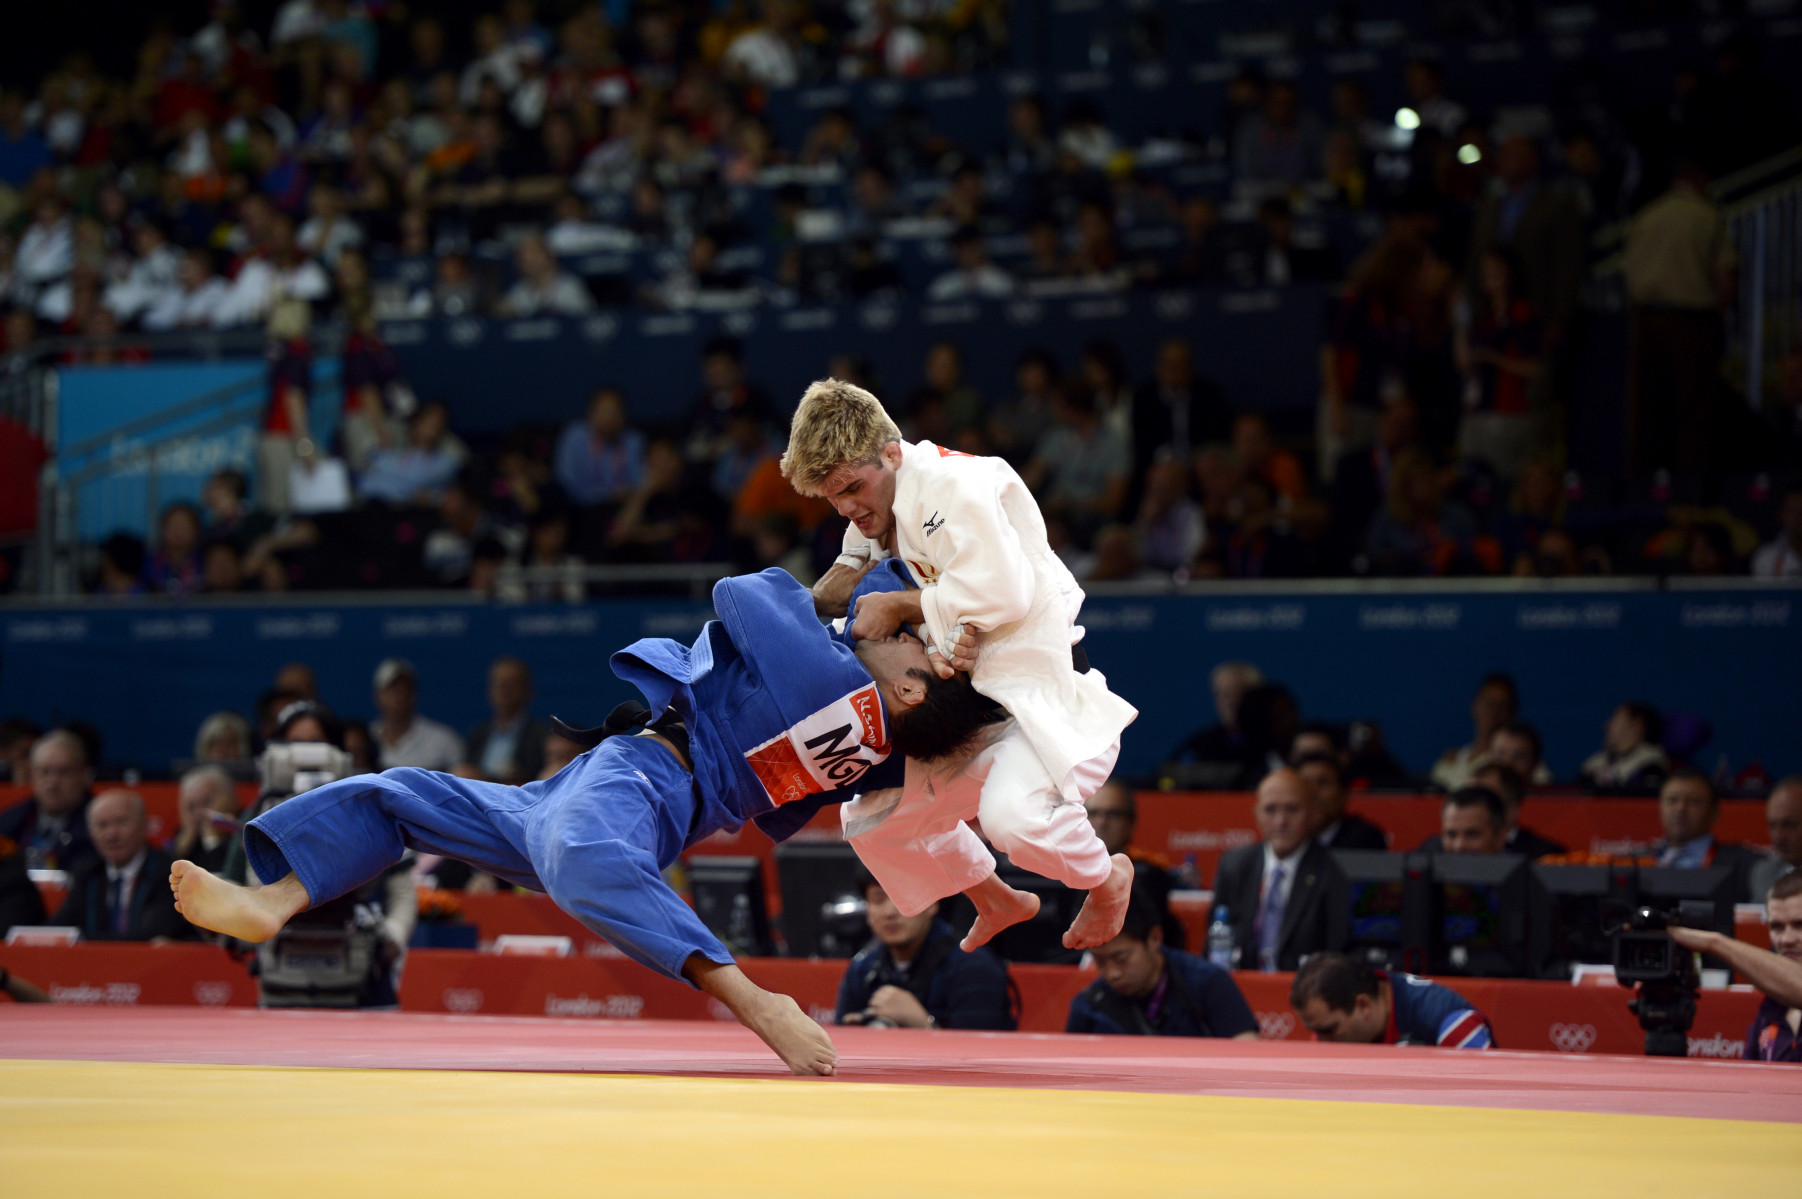 Men's Judo - 73kg. Class. 

Nicholas Delpopolo of  the United States in white
Nyam-Ochir Sainjargal of Mongolia in blue.  : London Olympics : Photography by Adam Stoltman: Sports Photography, The Arts, Portraiture, Travel, Photojournalism and Fine Art in New York